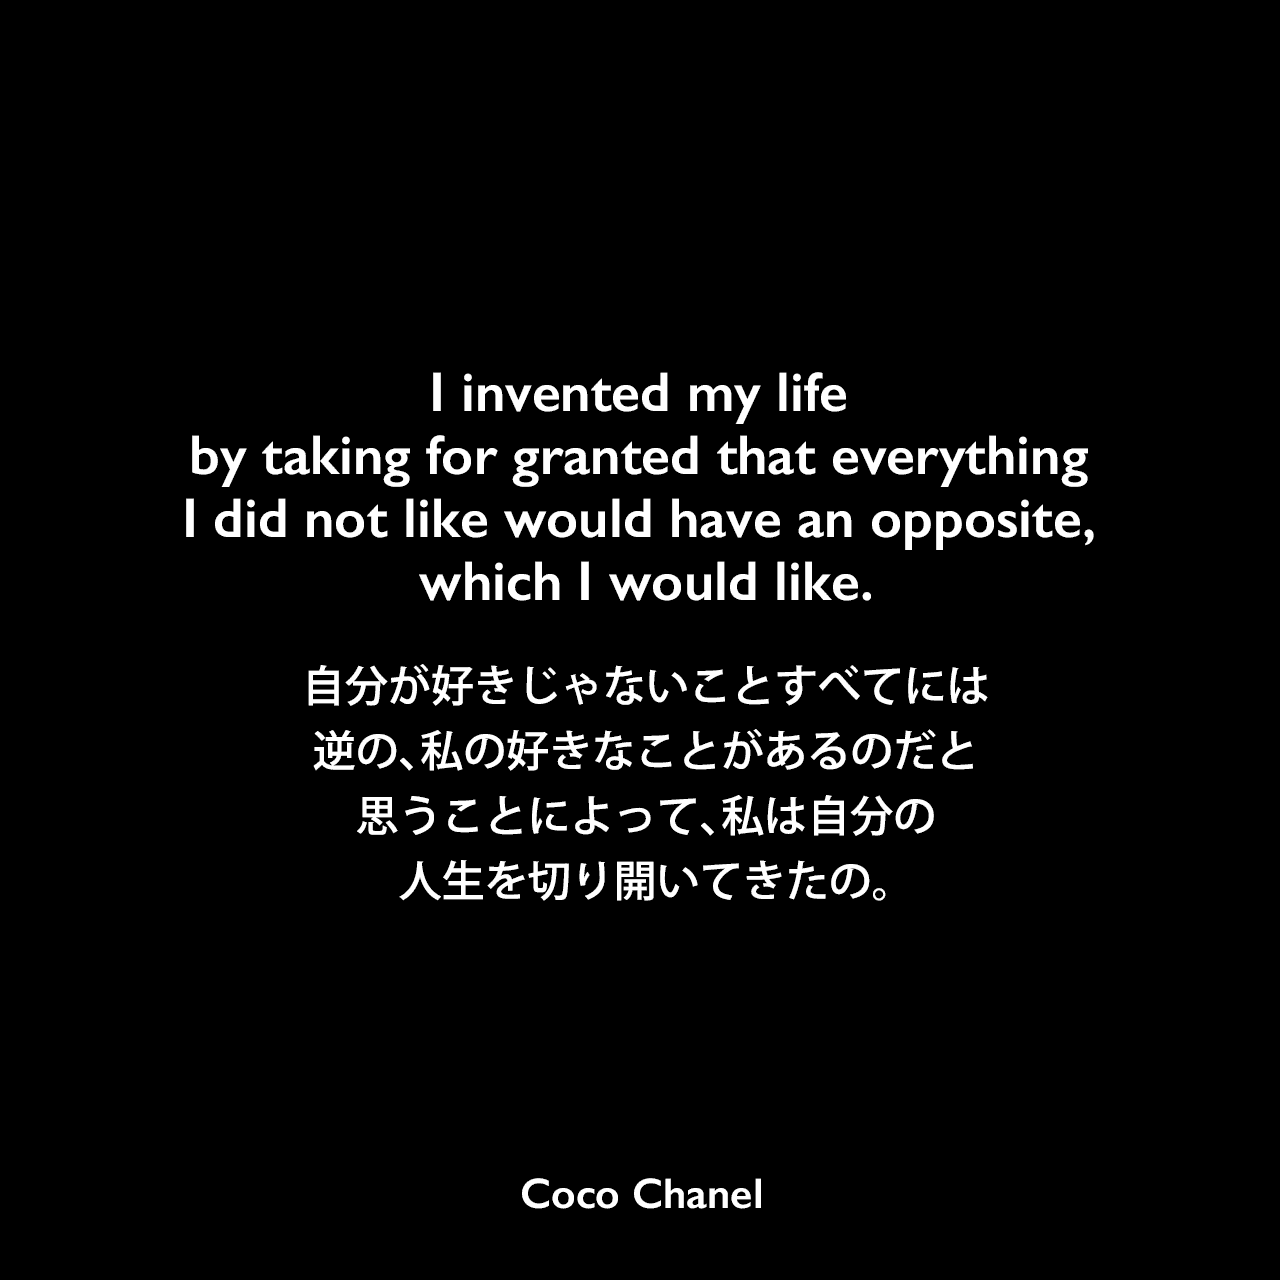 I invented my life by taking for granted that everything I did not like would have an opposite, which I would like.自分が好きじゃないことすべてには、逆の、私の好きなことがあるのだと思うことによって、私は自分の人生を切り開いてきたの。Coco Chanel